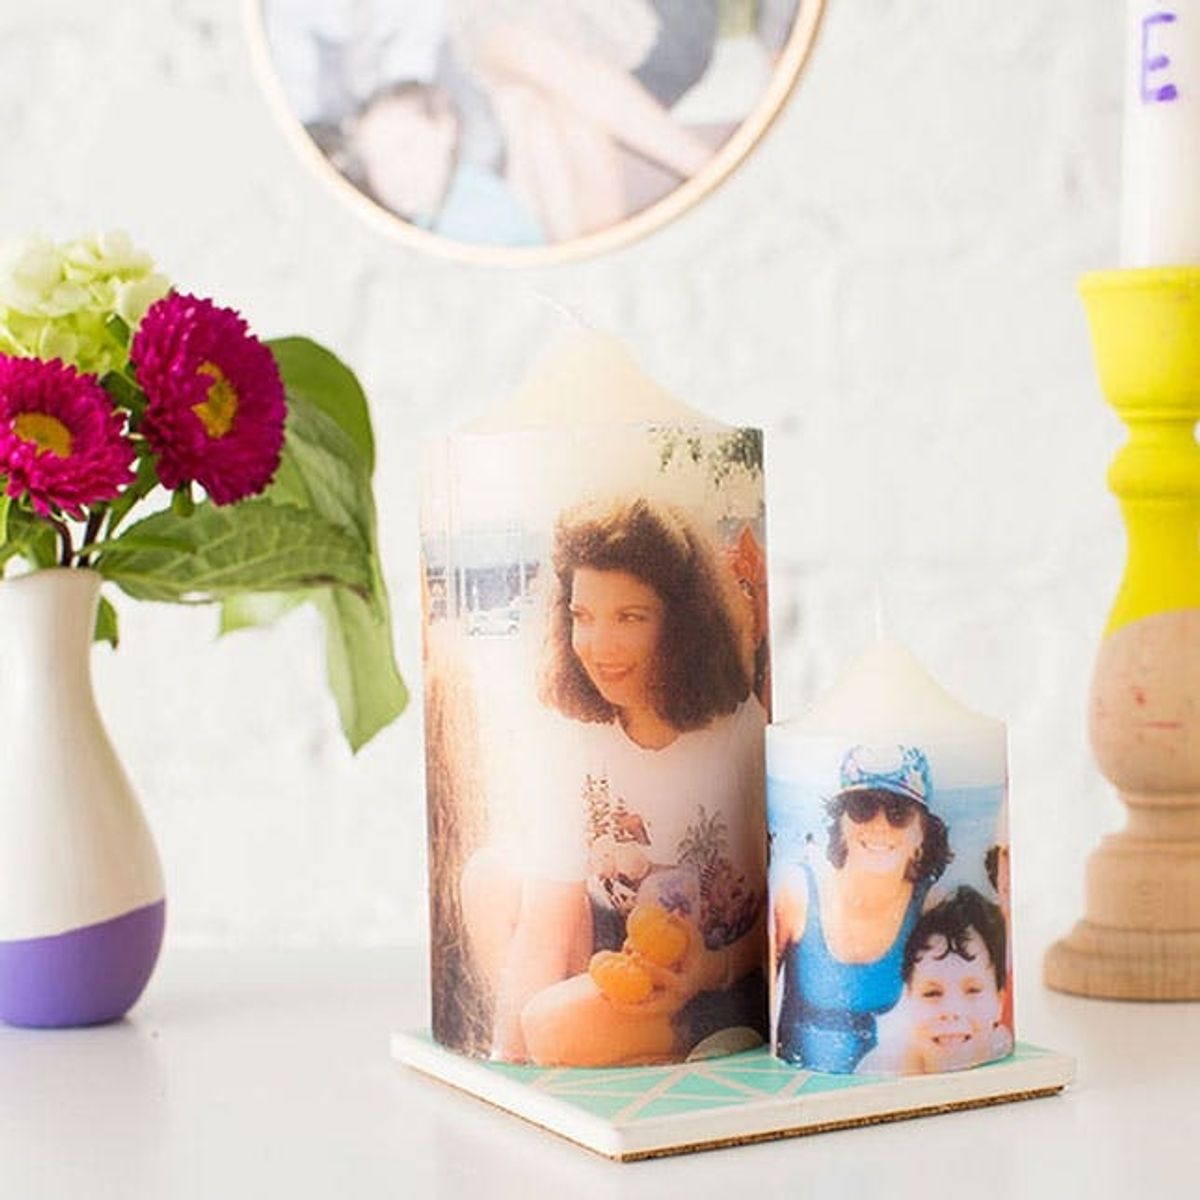 How to Turn Tissue Paper into Personalized Photo Presents for Mom